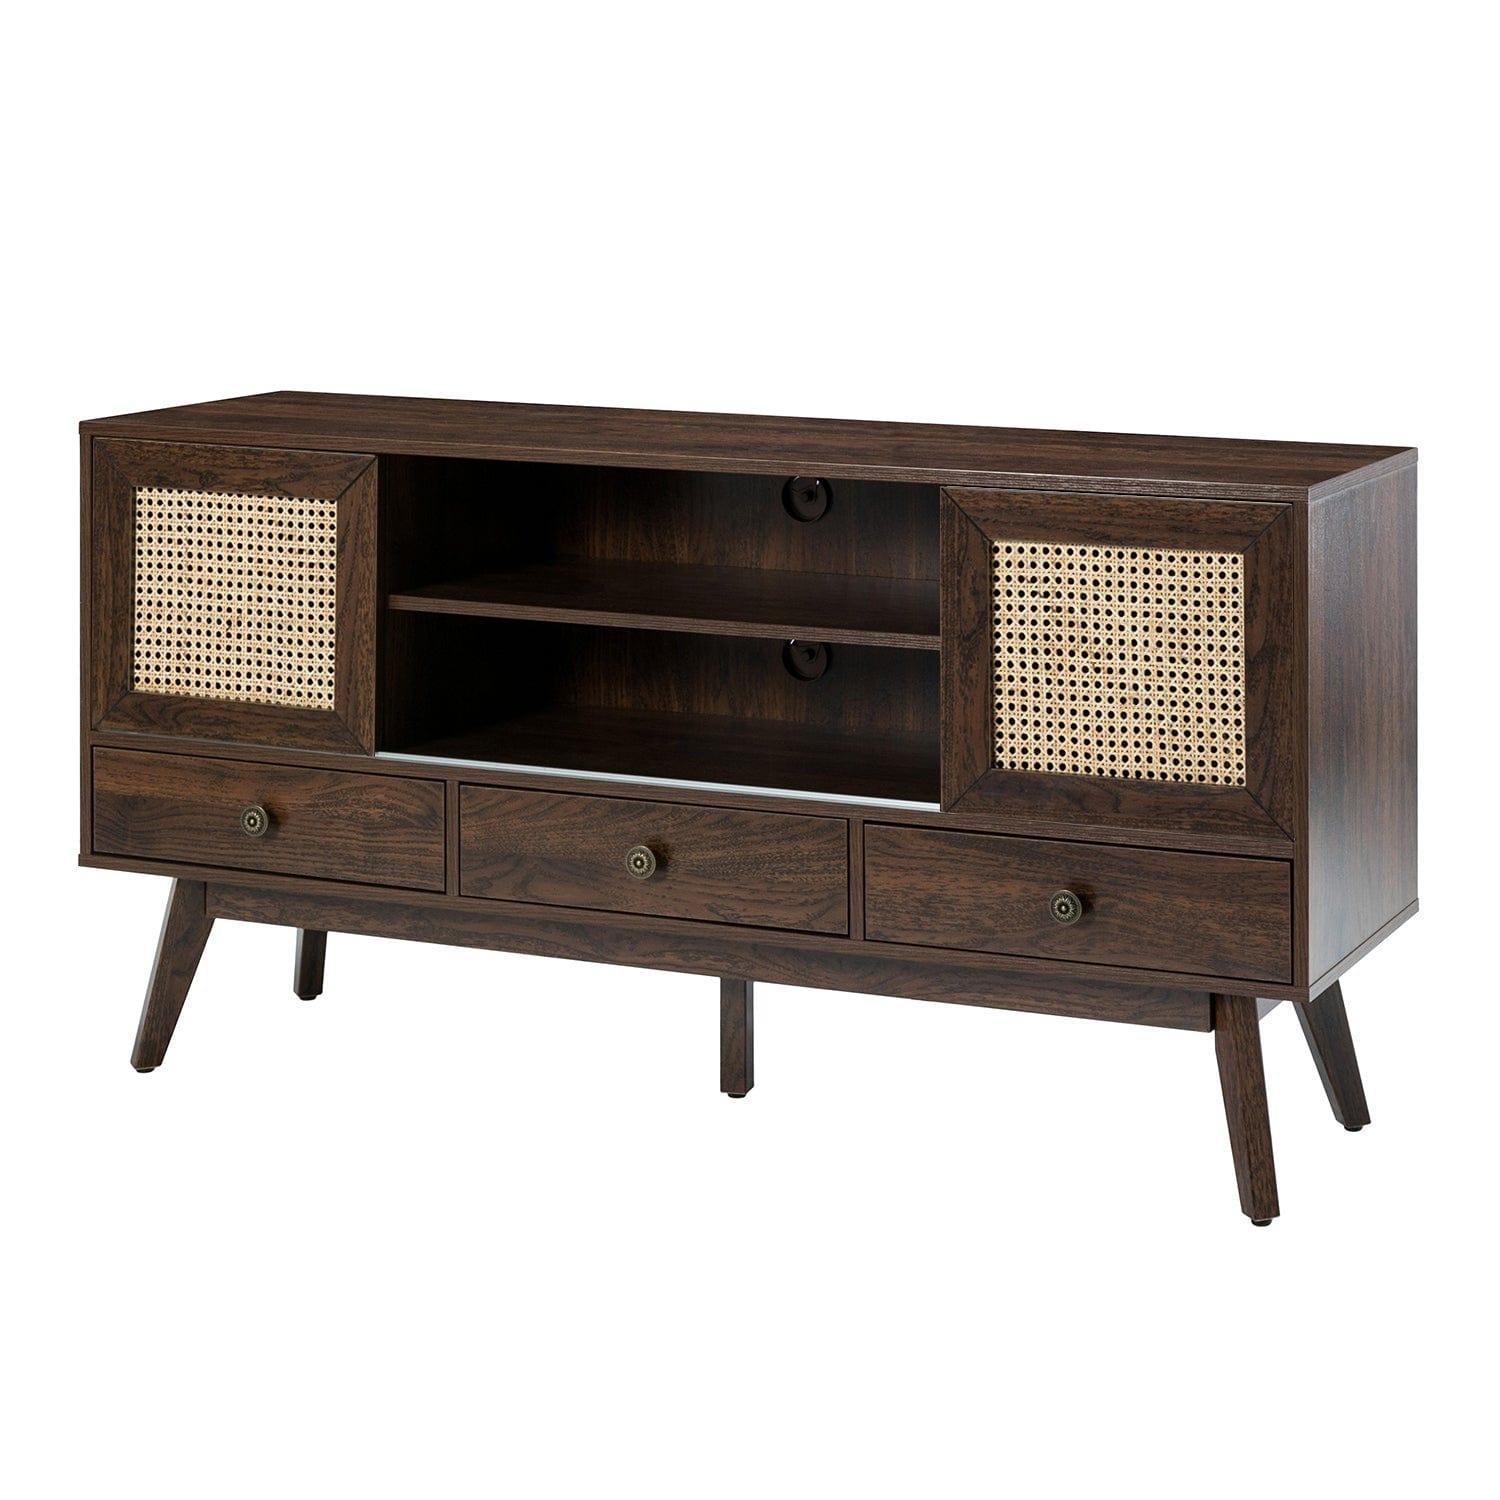 Shop Thetis TV Stand with Two Doors for TVs up to 65" Mademoiselle Home Decor